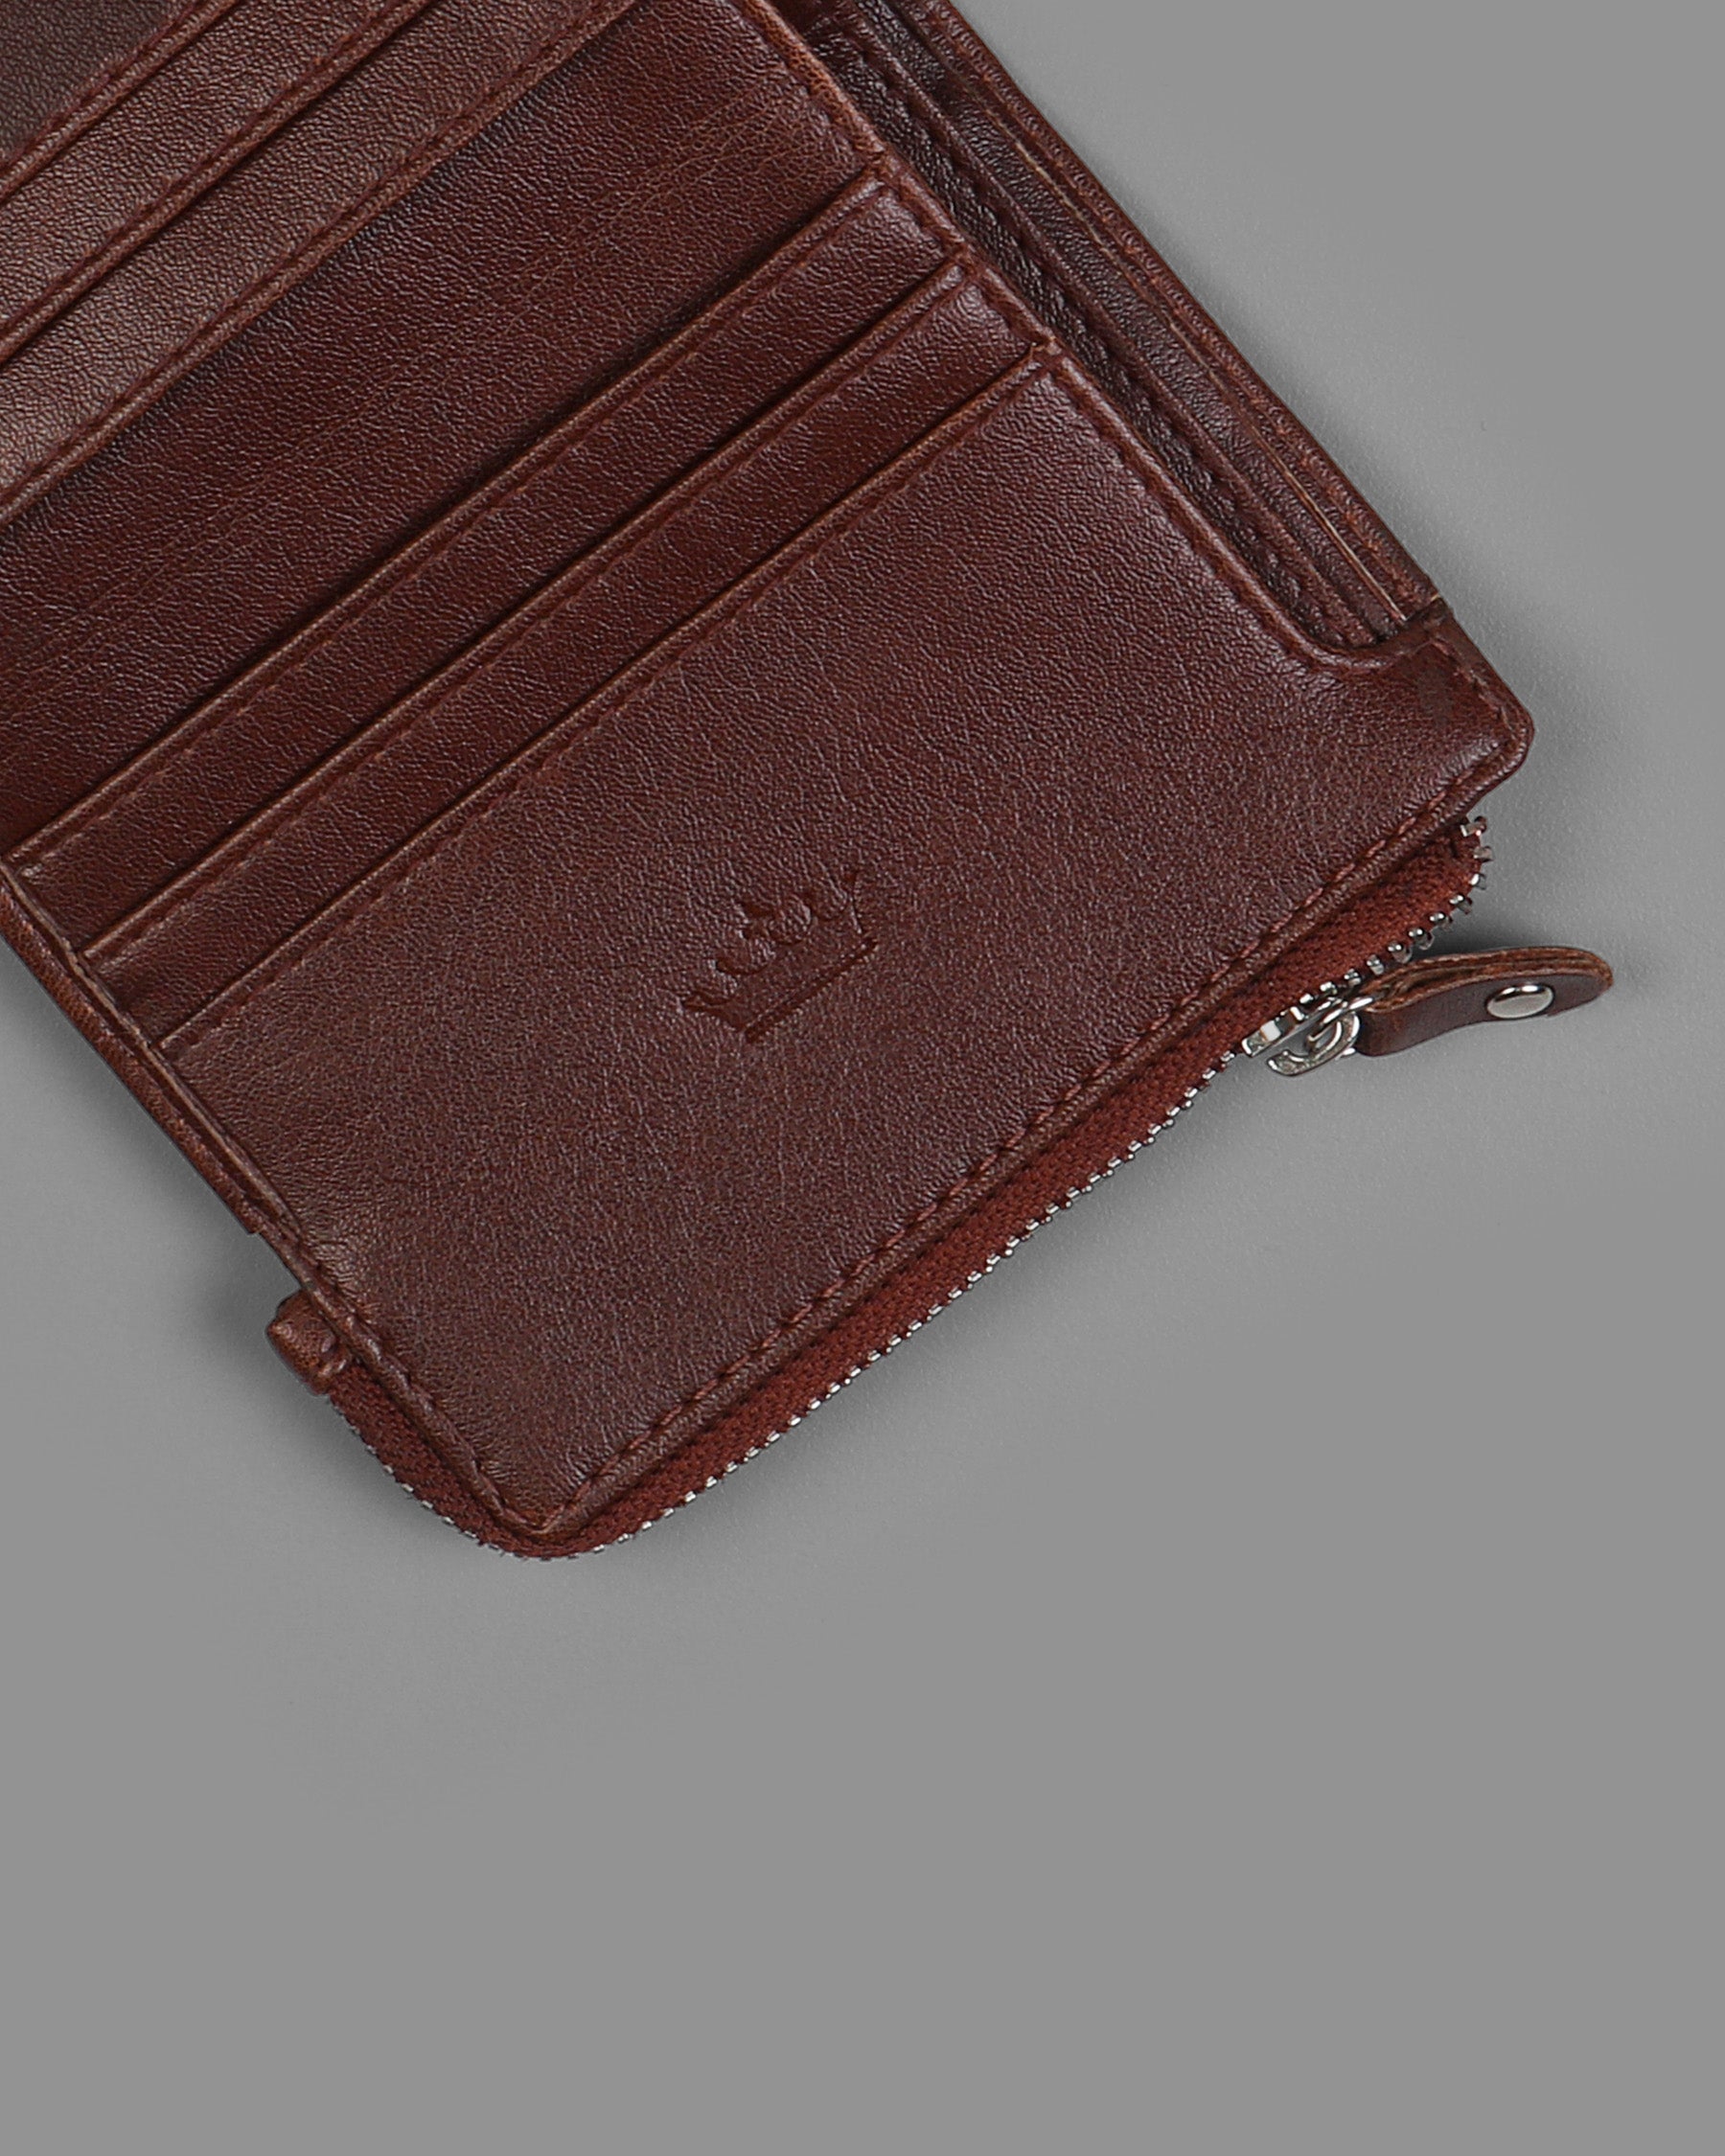 Tan Vegan Leather Handcrafted Wallet WT06